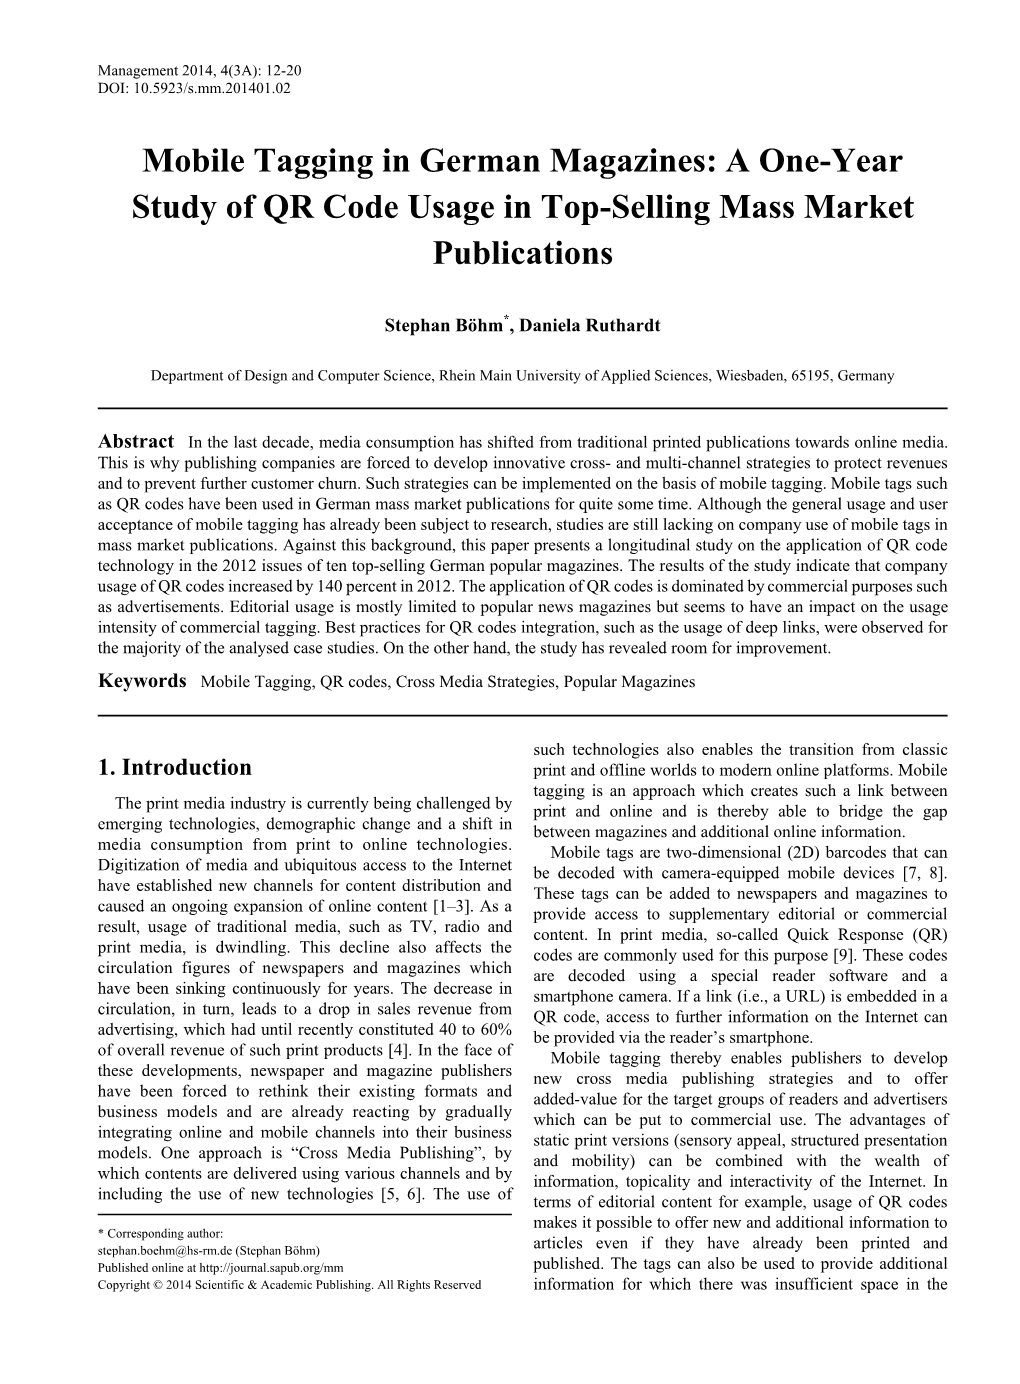 Mobile Tagging in German Magazines: a One-Year Study of QR Code Usage in Top-Selling Mass Market Publications